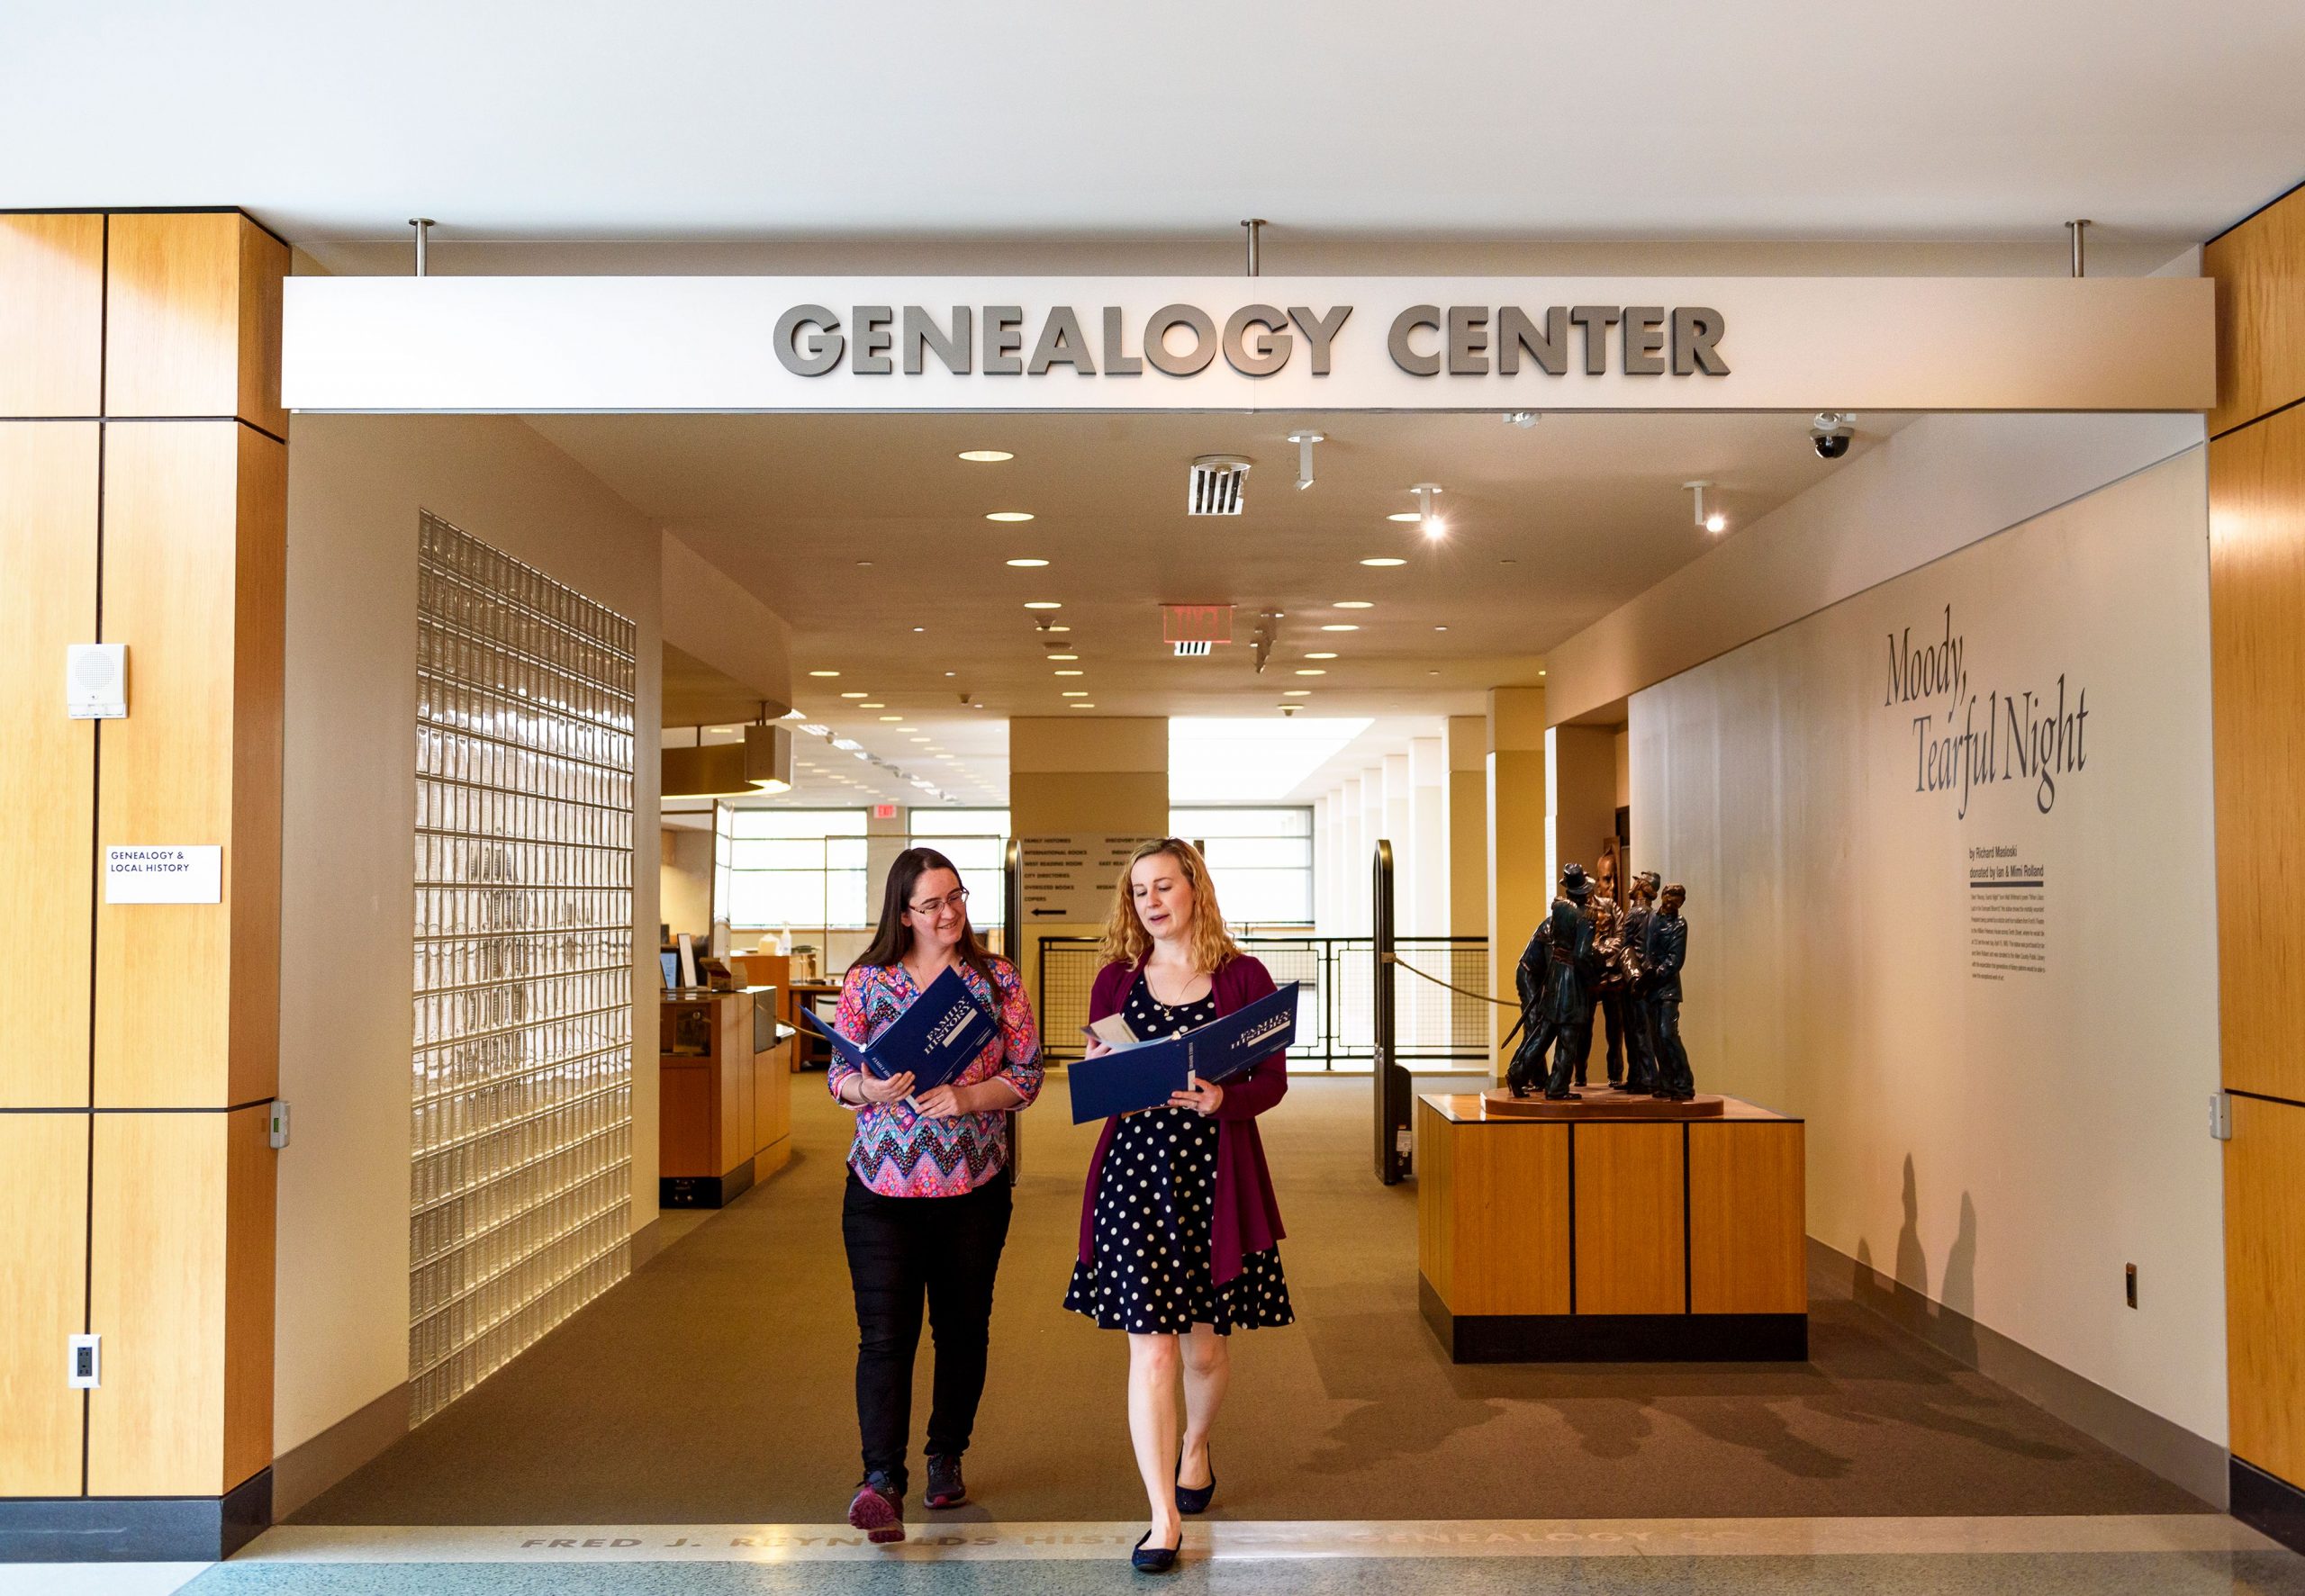 The Genealogy Center at the Allen County Public Library, downtown Fort Wayne. (Photo credit: Visit Fort Wayne)